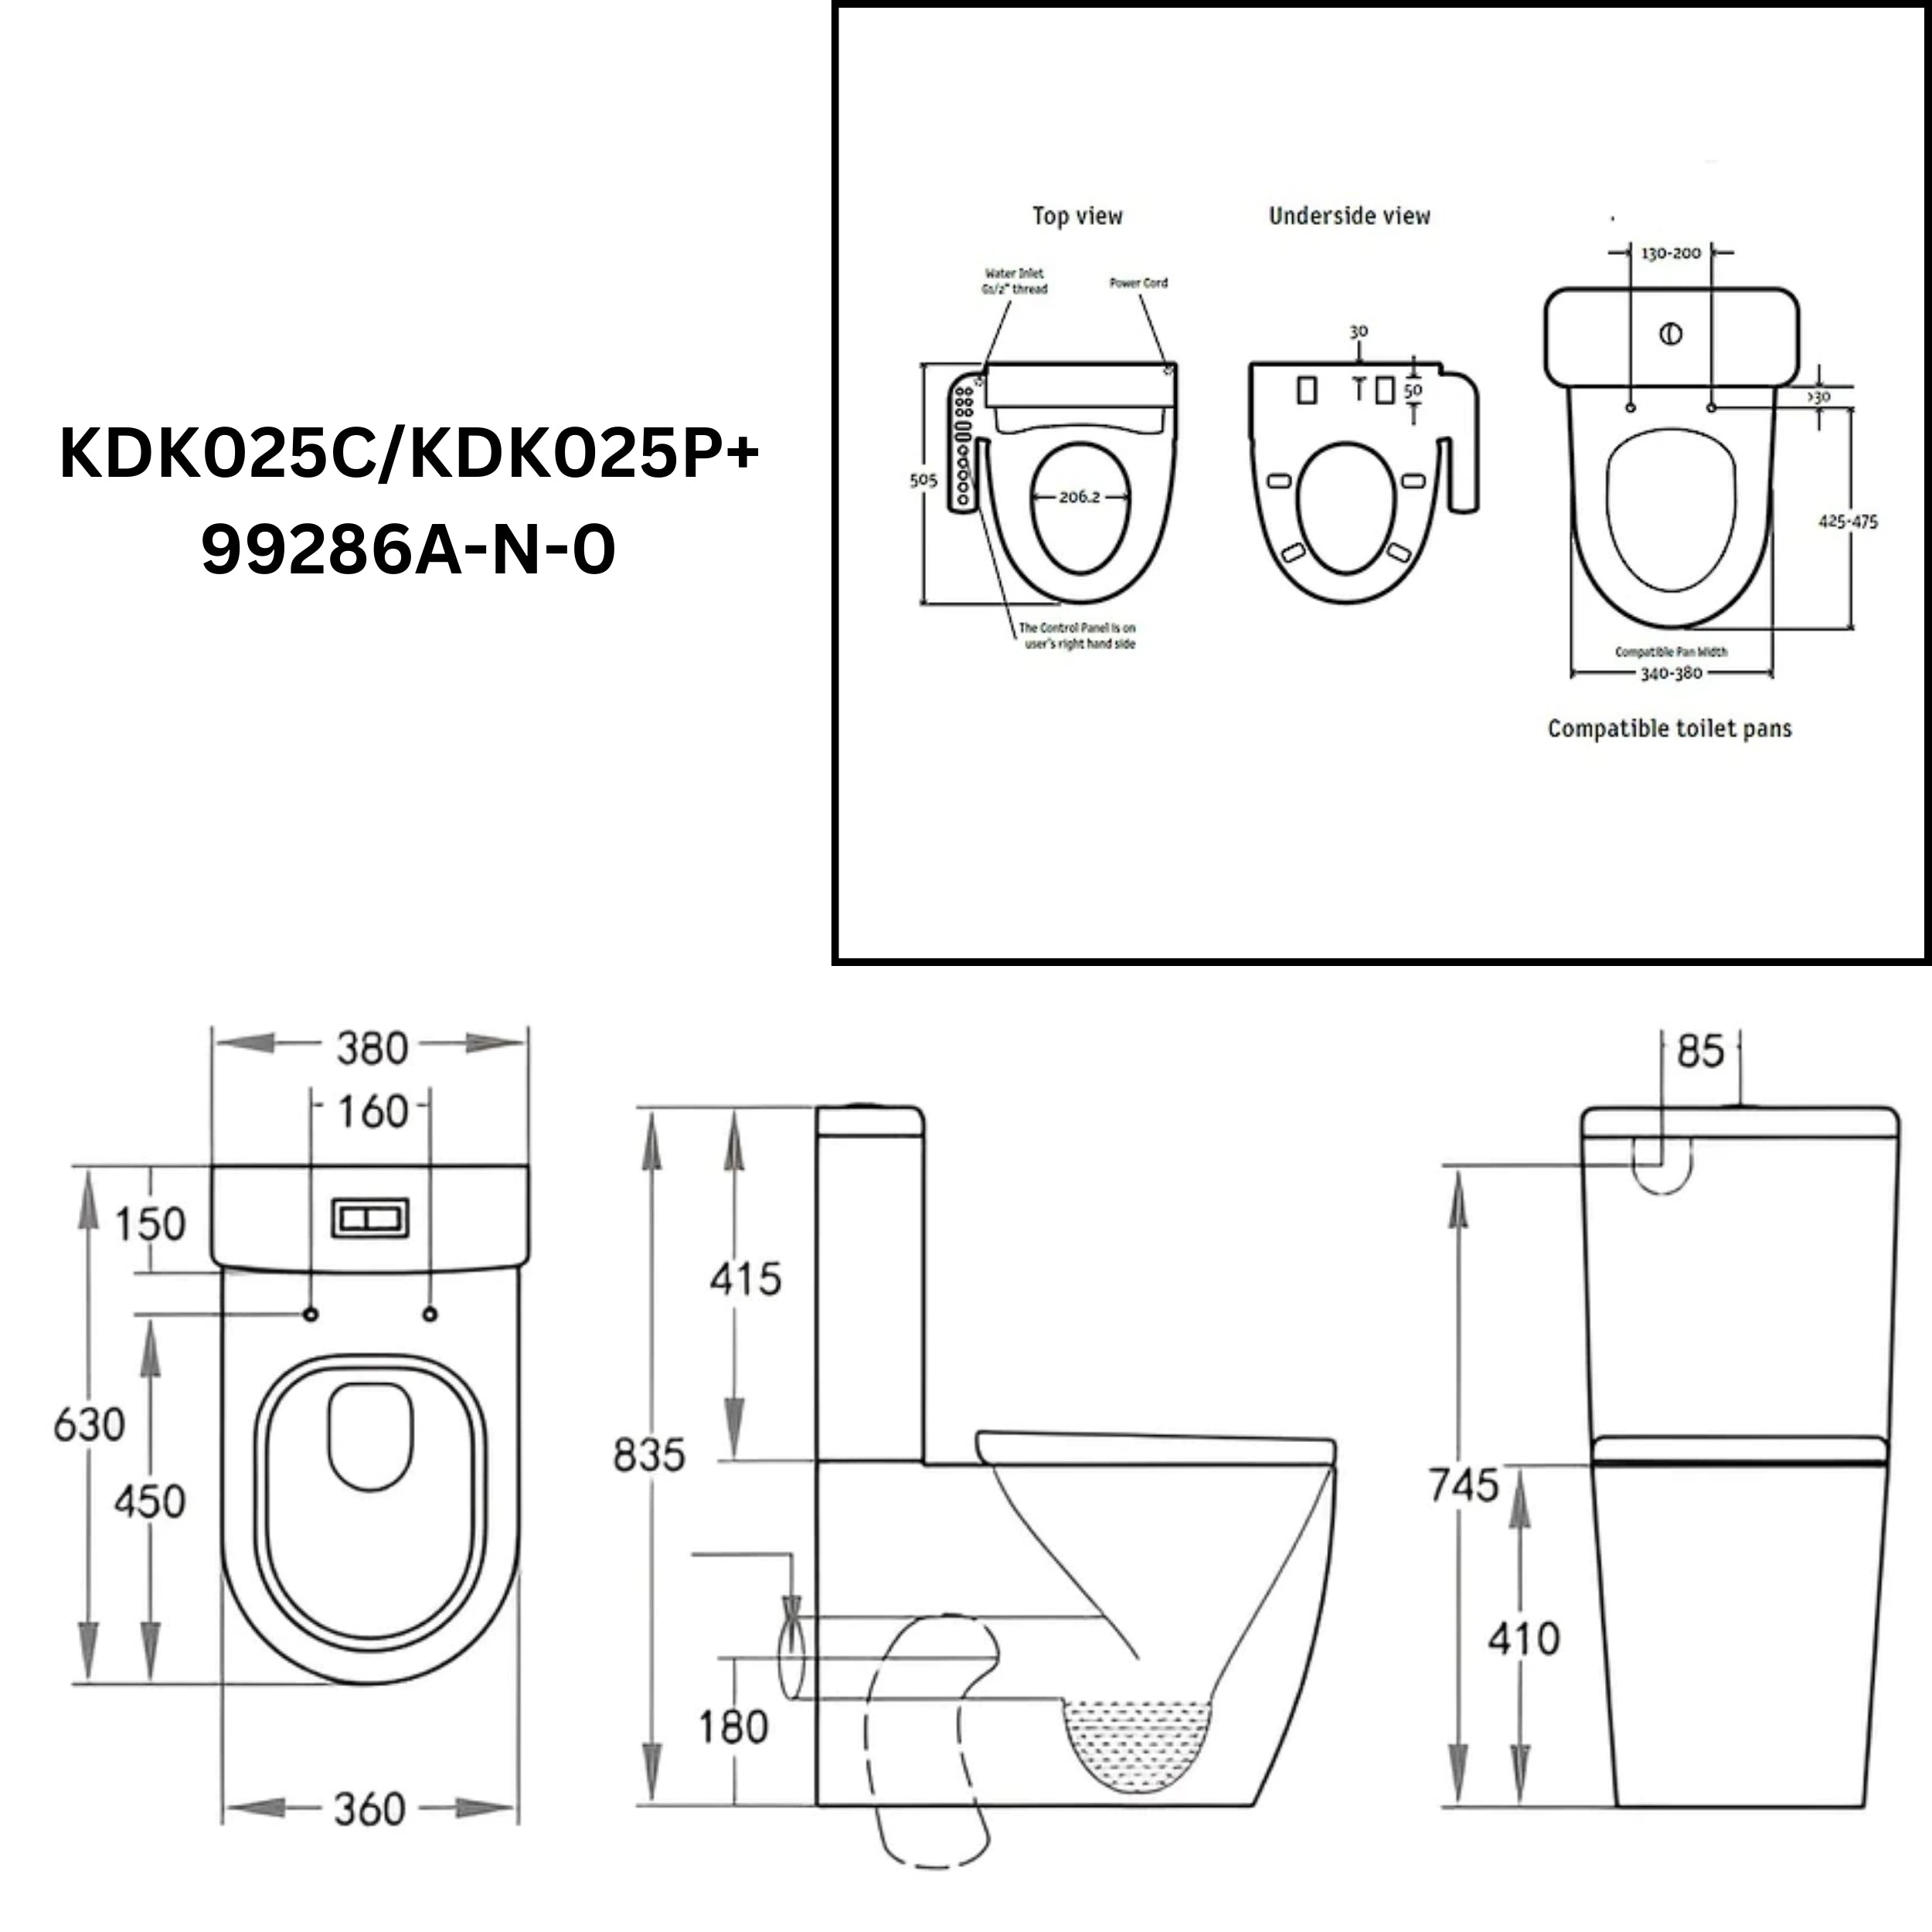 ENGLEFIELD (BY KOHLER) ELECTRONIC BIDET SEAT W/ SIDE CONTROL AND VEDA BTW TOILET SUITE PACKAGE ELONGATED GLOSS WHITE